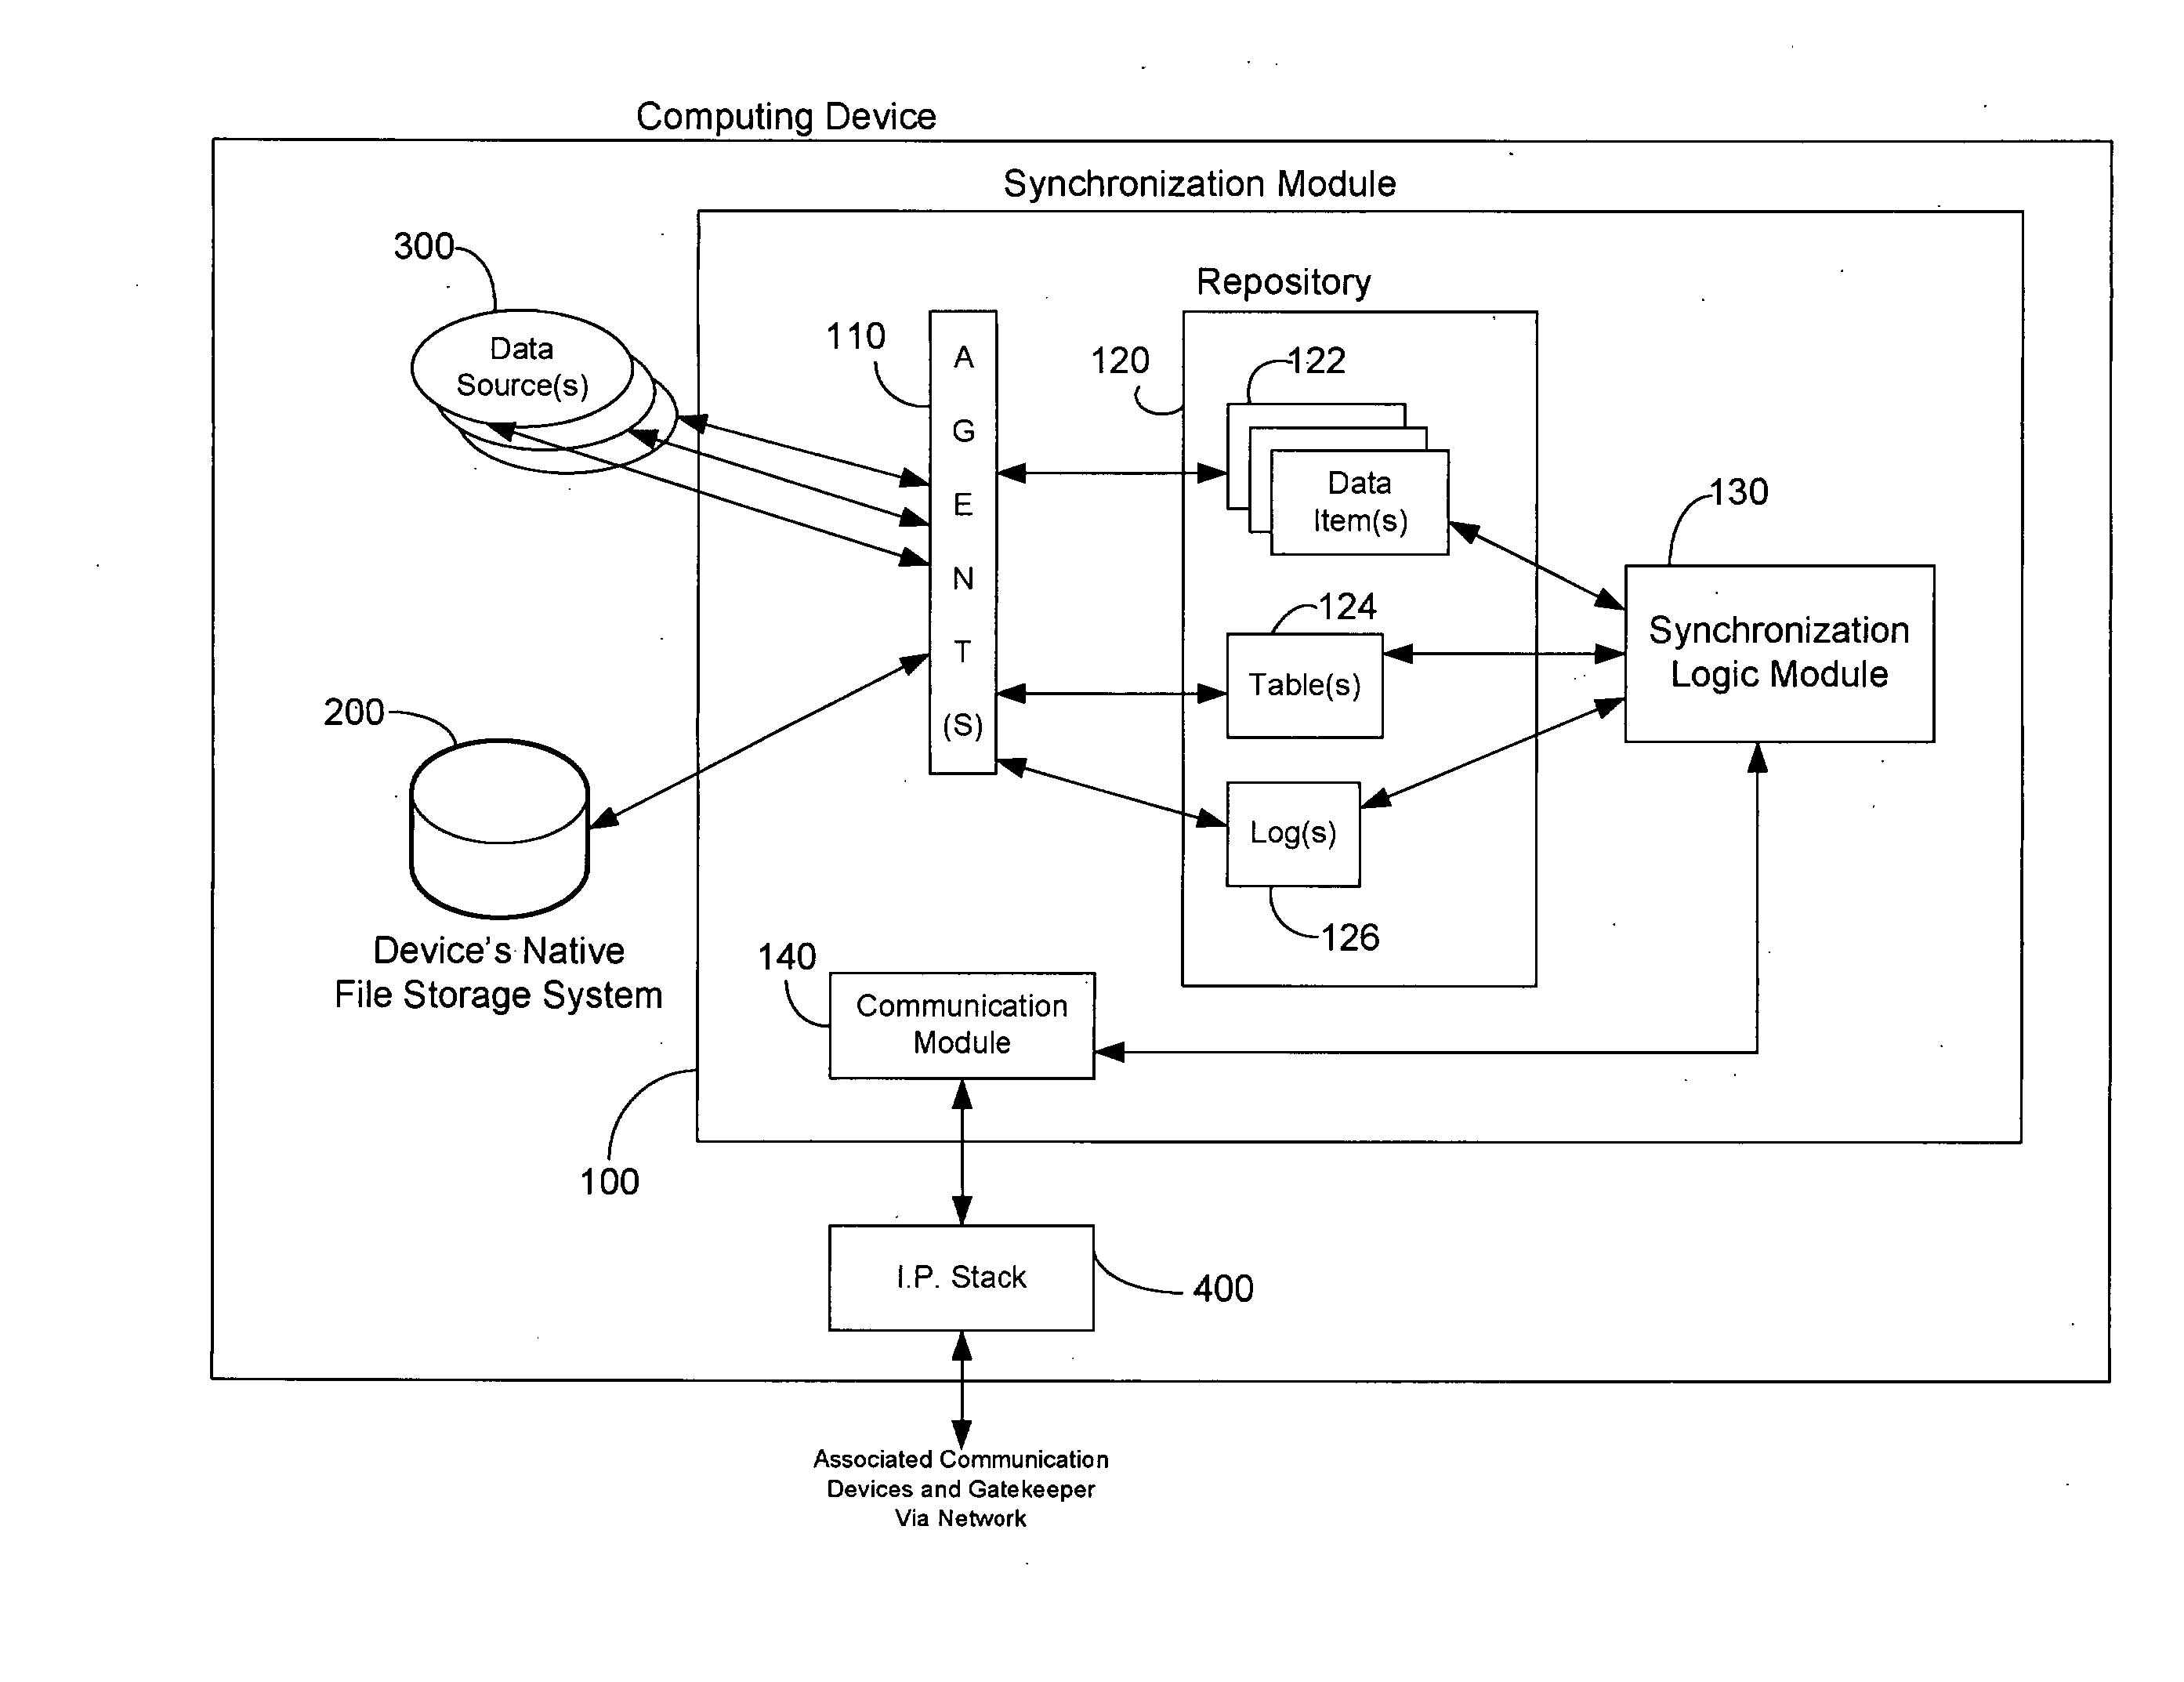 System and Method for the Synchronization of Data Across Multiple Computing Devices